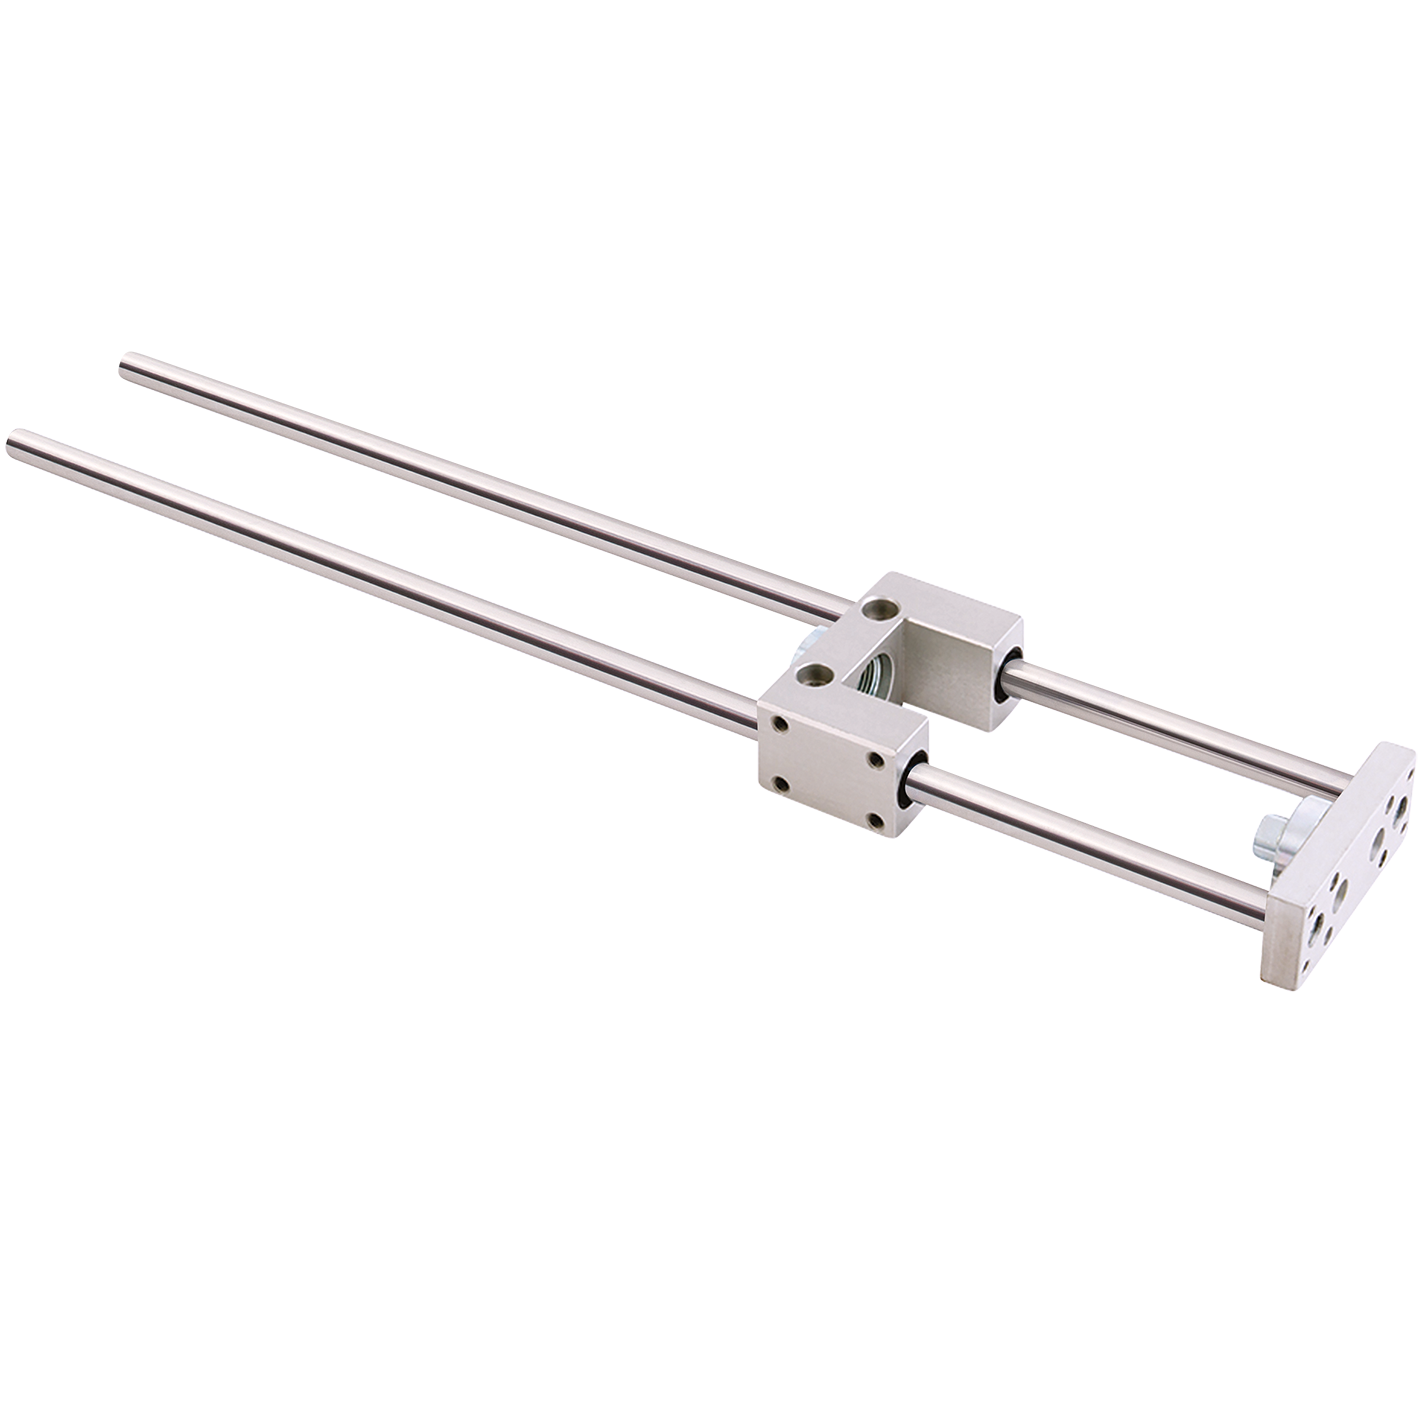 40mm Bore x 500mm Stroke Cylinder Guide Unit